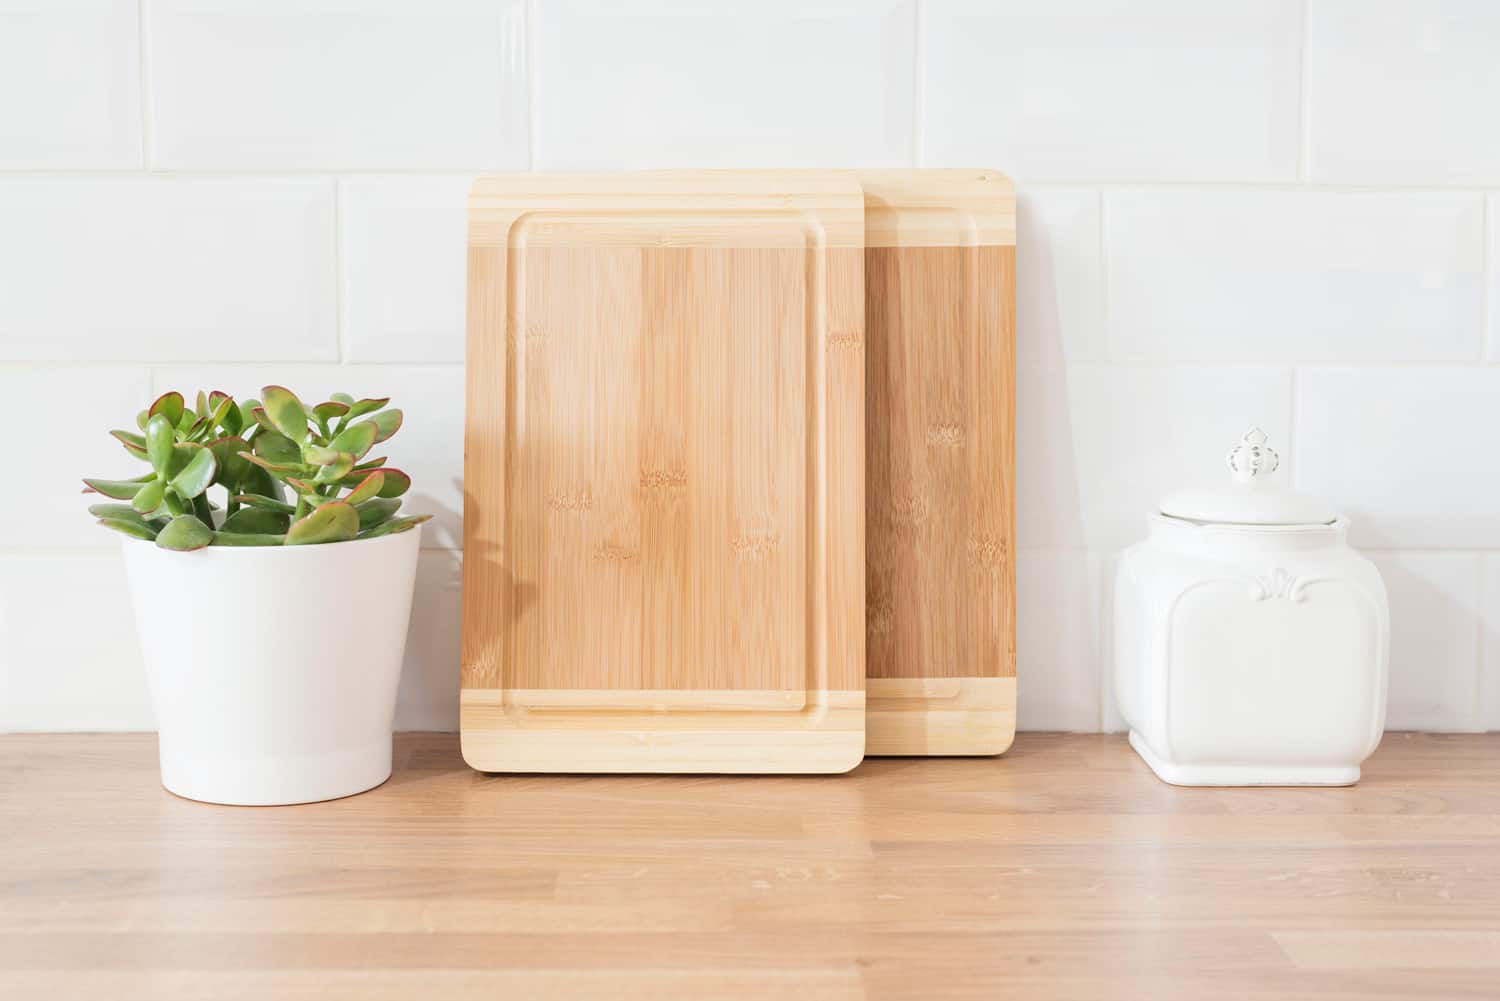 Bright And Clean Modern Minimalist Kitchen, Close Up. Cutting Boards, Green Succulent Pot On A Wooden Worktop